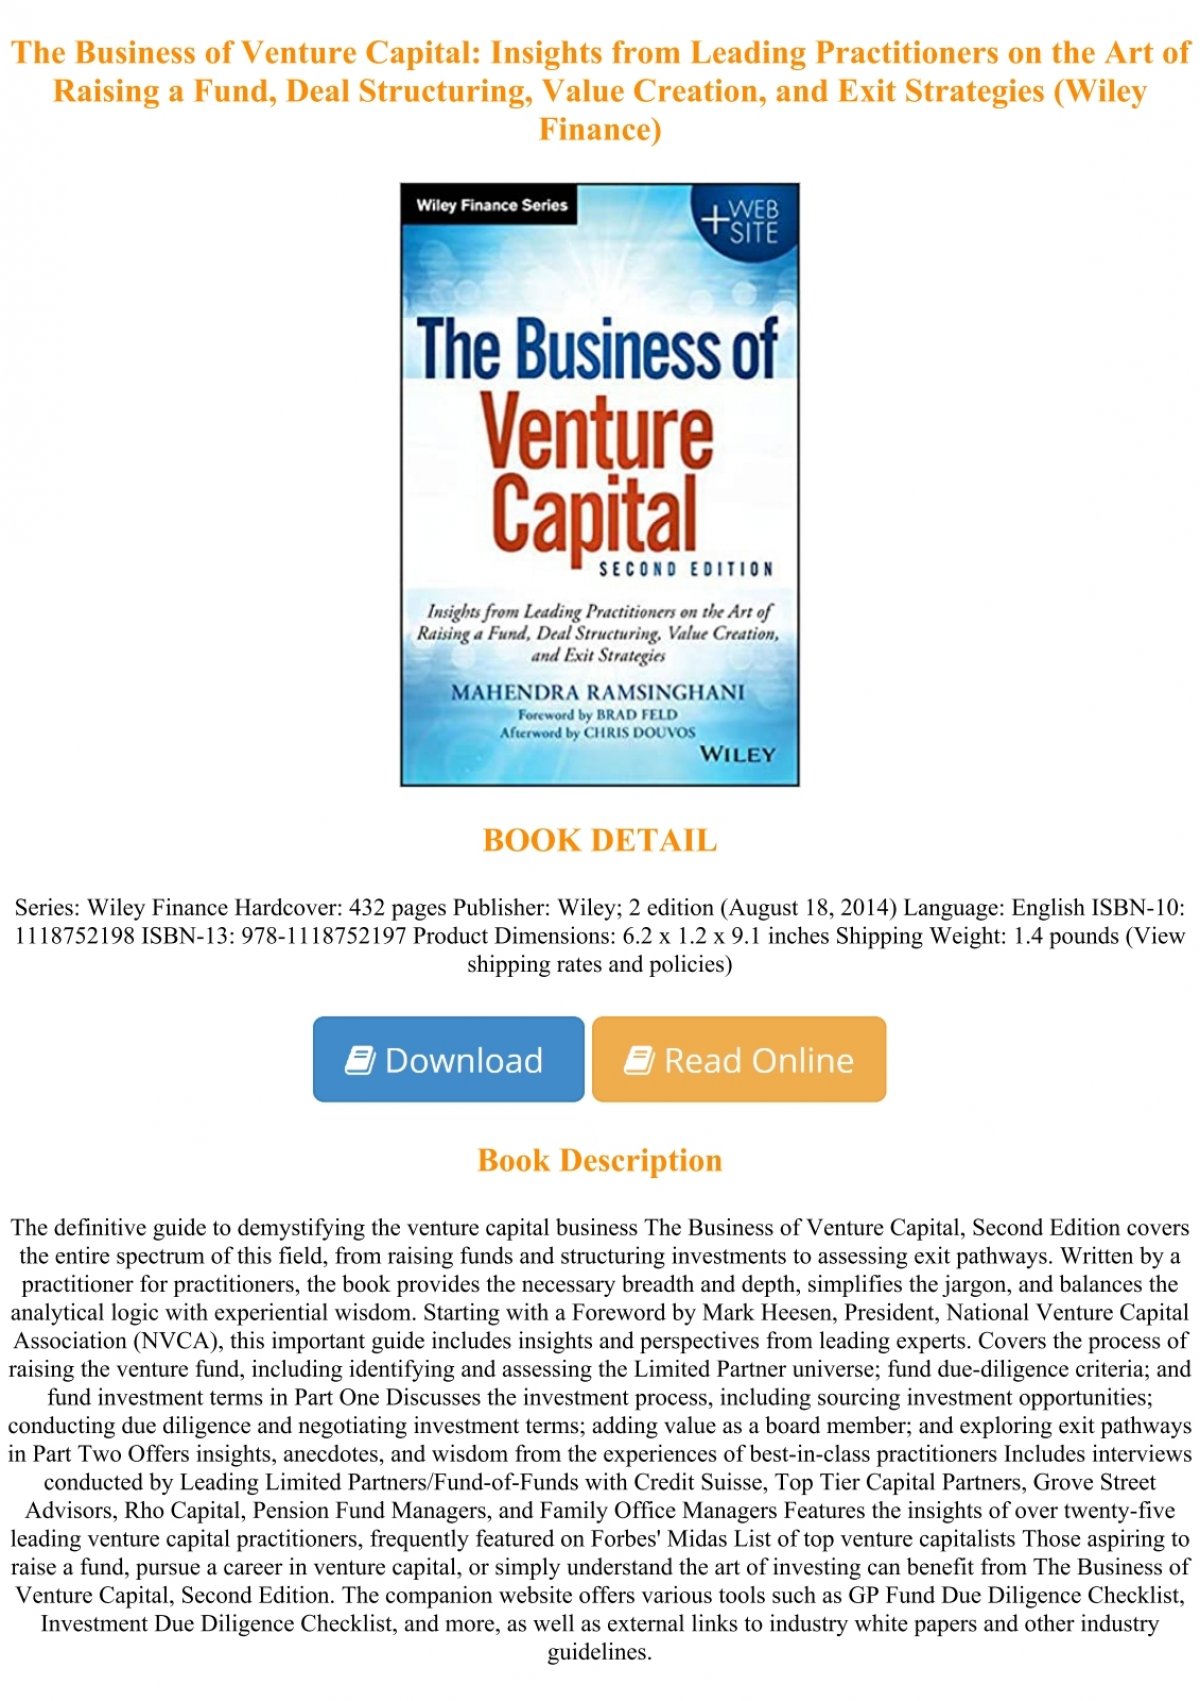 The Business of Venture Capital: The Art of Raising a Fund, Structuring  Investments, Portfolio Management, and Exits